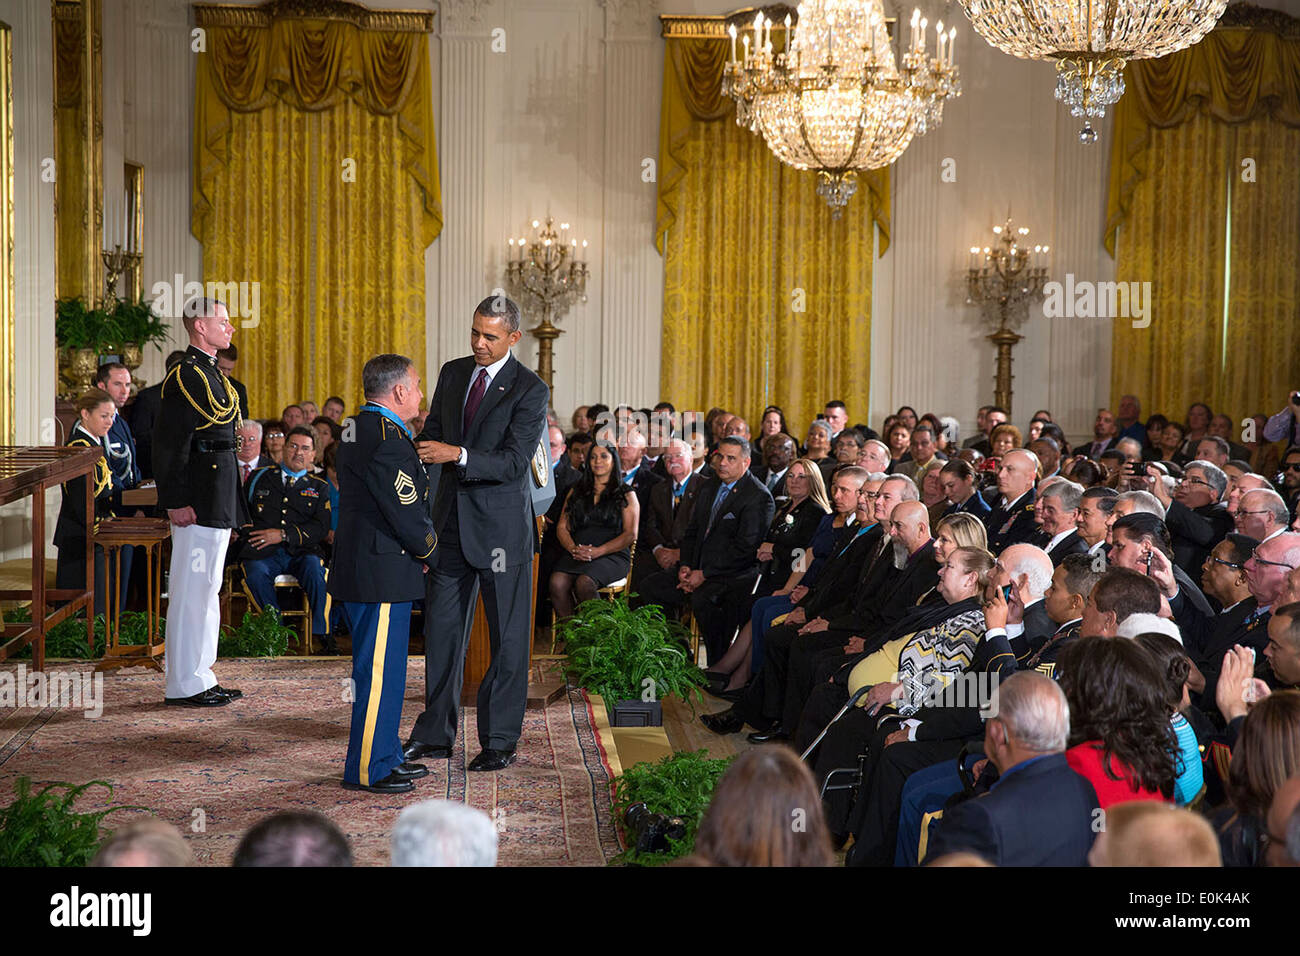 US President Barack Obama presents the Medal of Honor to Sergeant First Class Jose Rodela during the Medal of Honor ceremony in the East Room of the White House March 18, 2014 in Washington, DC. Stock Photo